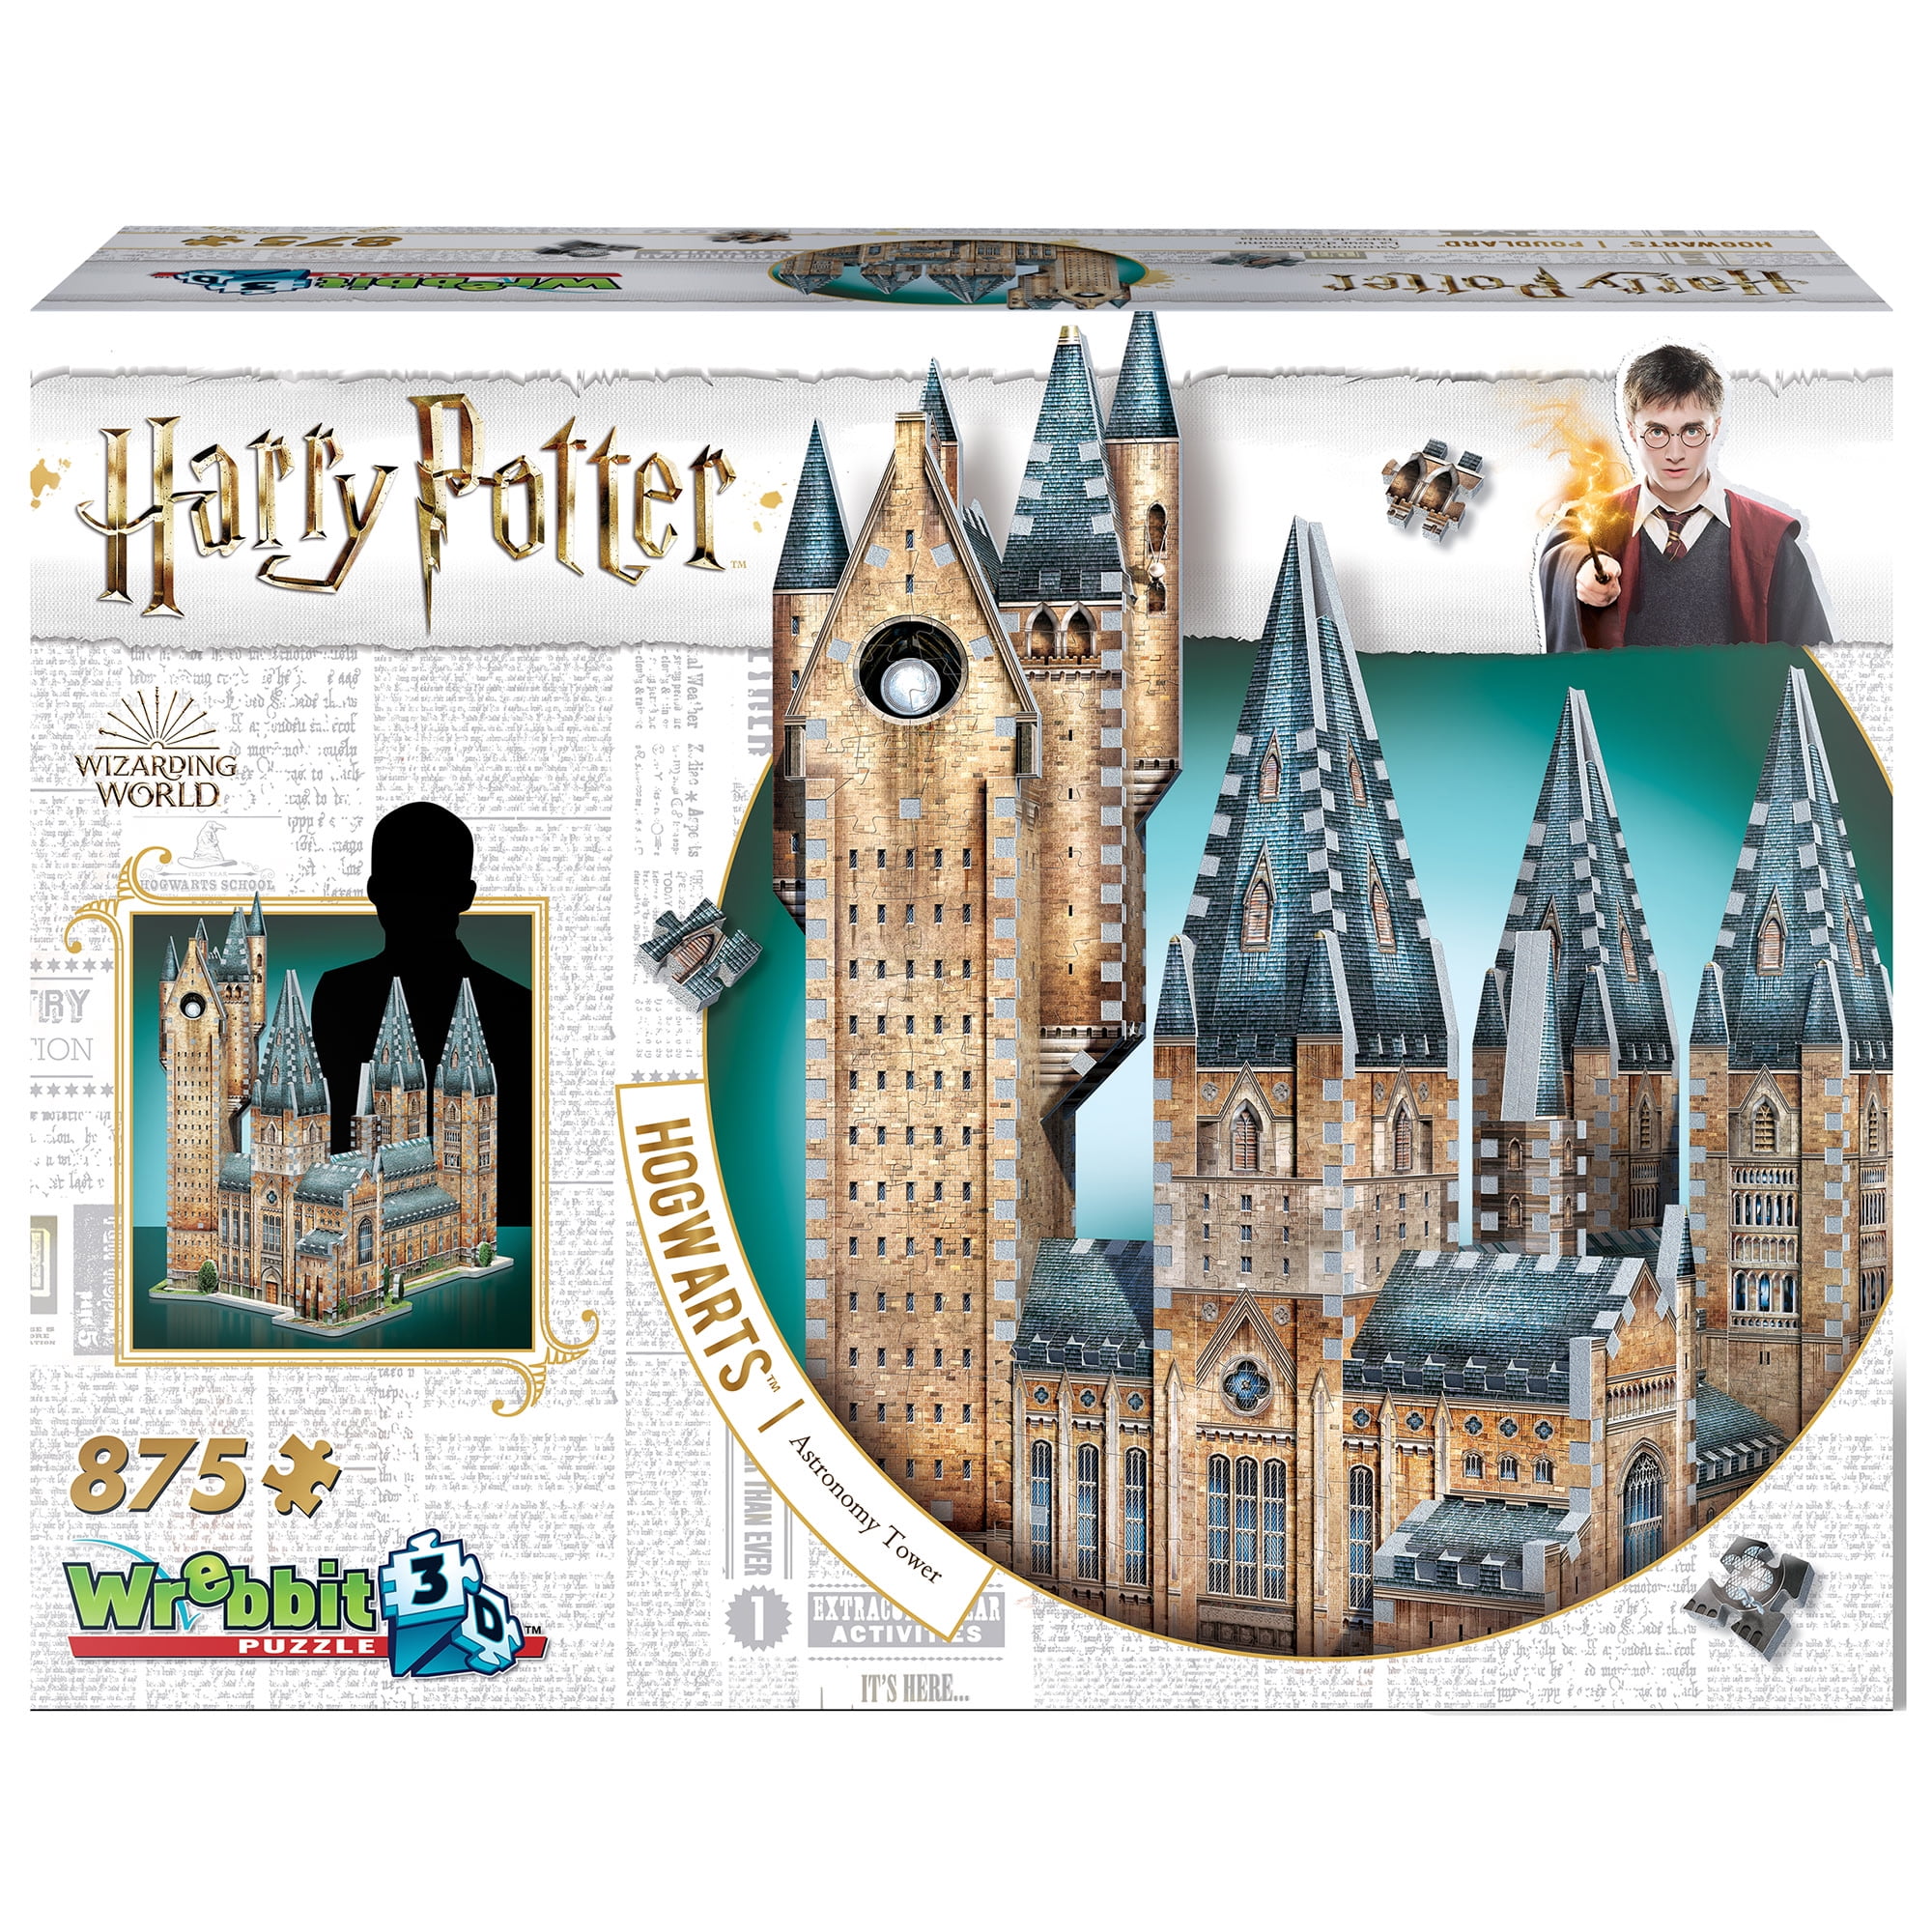 Hogwarts Jigsaw 1000 Pieces Castle Jigsaw Puzzles Adult Kid Educational Toy Gift 